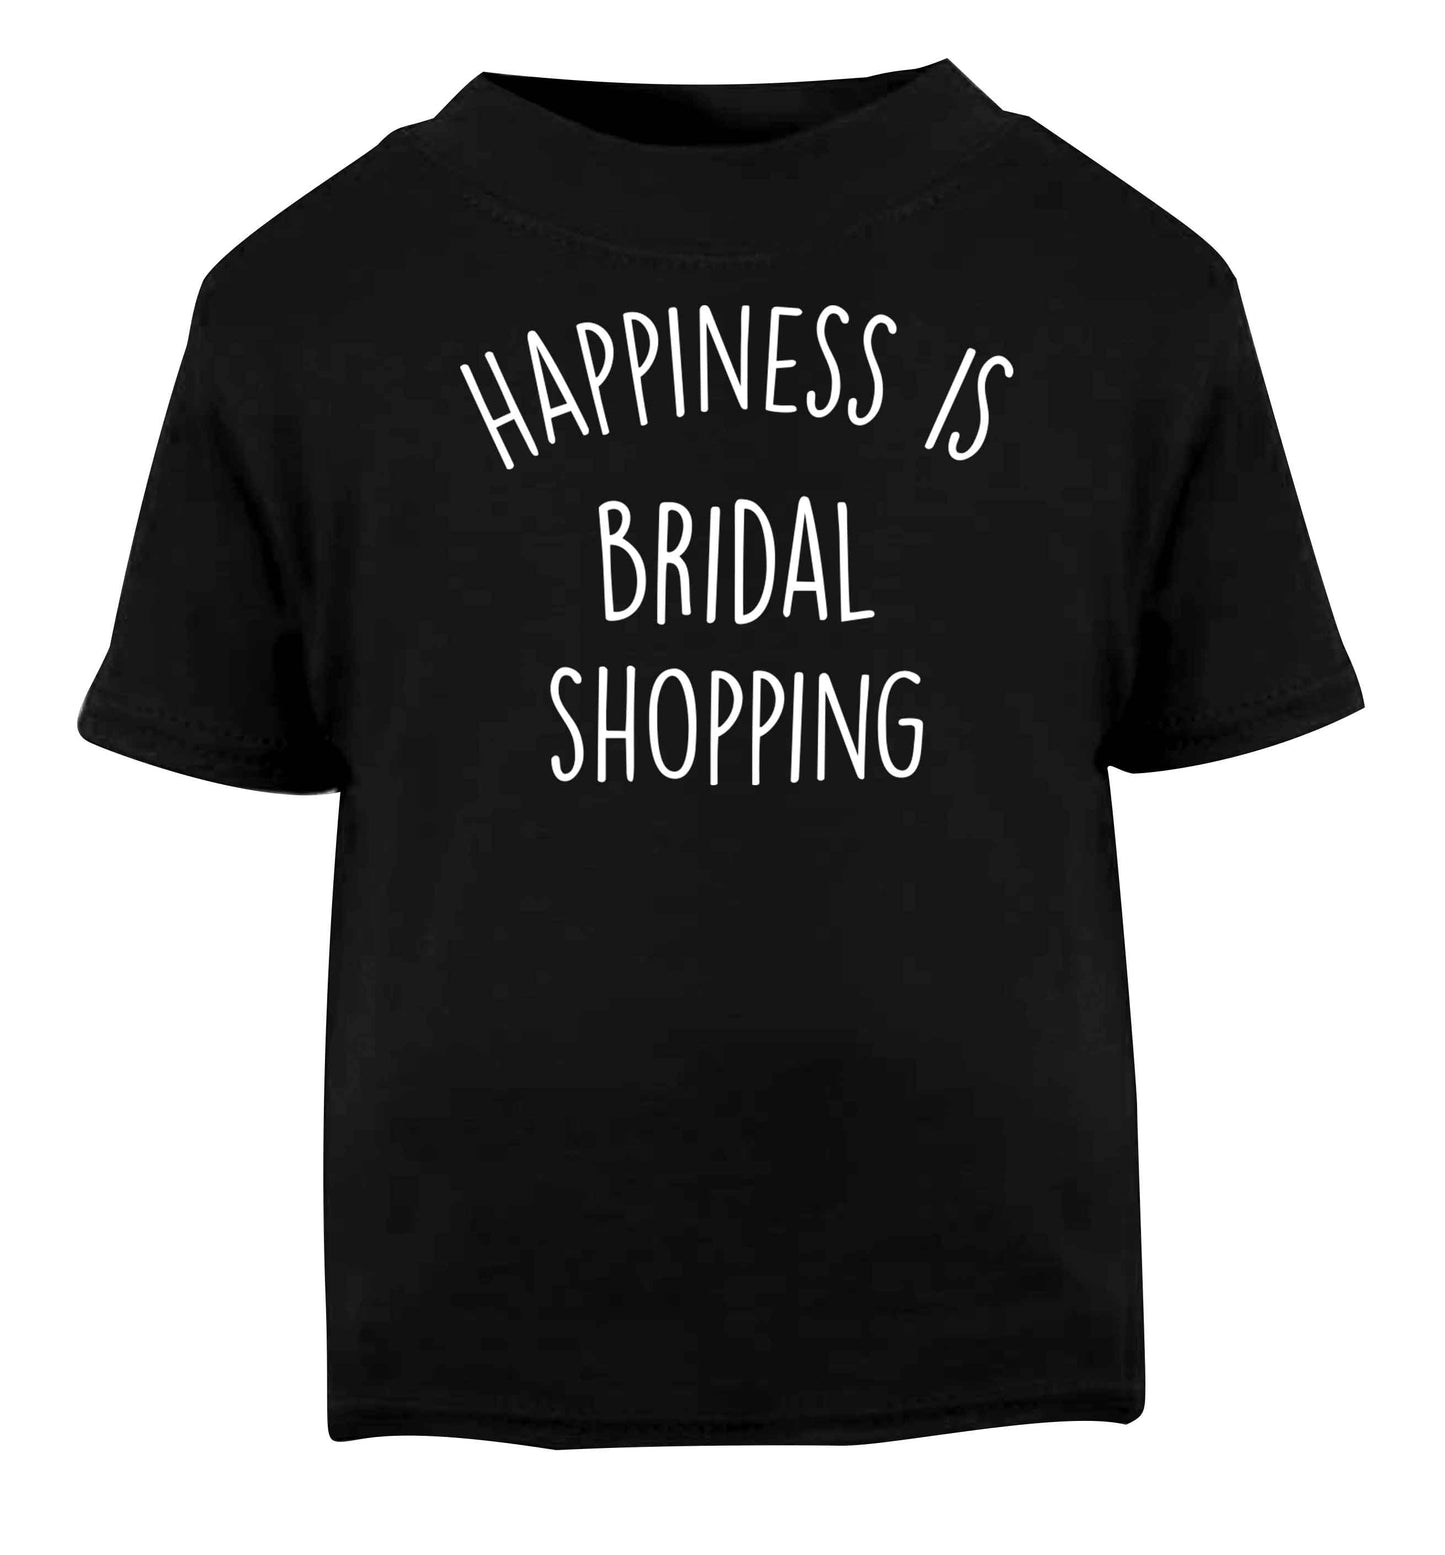 Happiness is bridal shopping Black baby toddler Tshirt 2 years